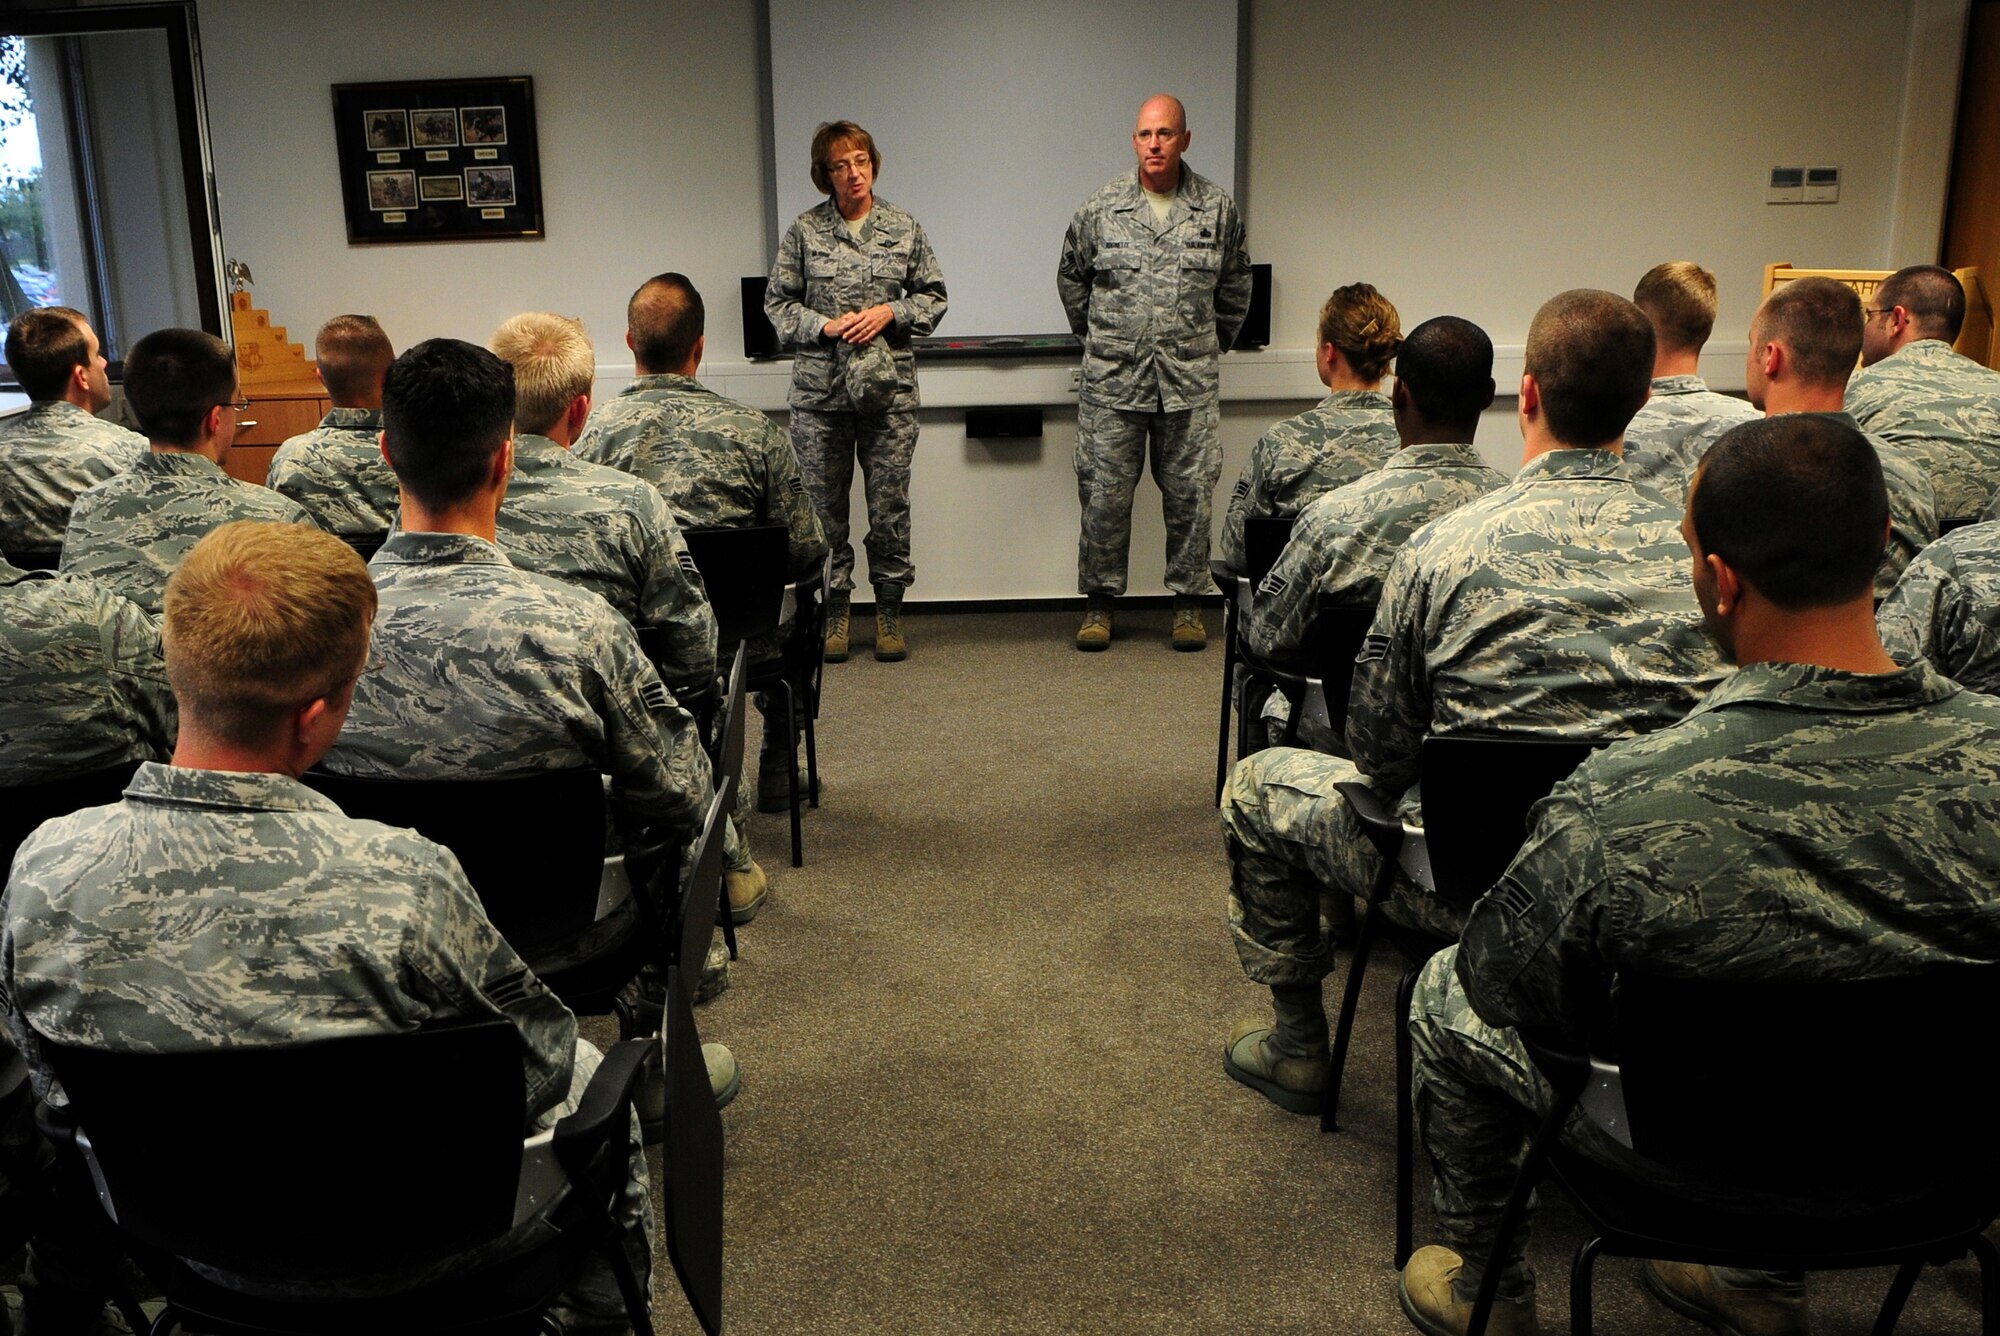 SPANGDAHLEM AIR BASE, Germany – Brig. Gen. Eden Murrie, director of Air Force Services, speaks with airman leadership school students during her visit here Sept. 9. General Murrie visited various facilities and flights within the 52nd Force Support Squadron to familiarize herself with how the 52nd Fighter Wing takes care of its Airmen and their families. (U.S. Air Force photo/Airman 1st Class Matthew B. Fredericks)